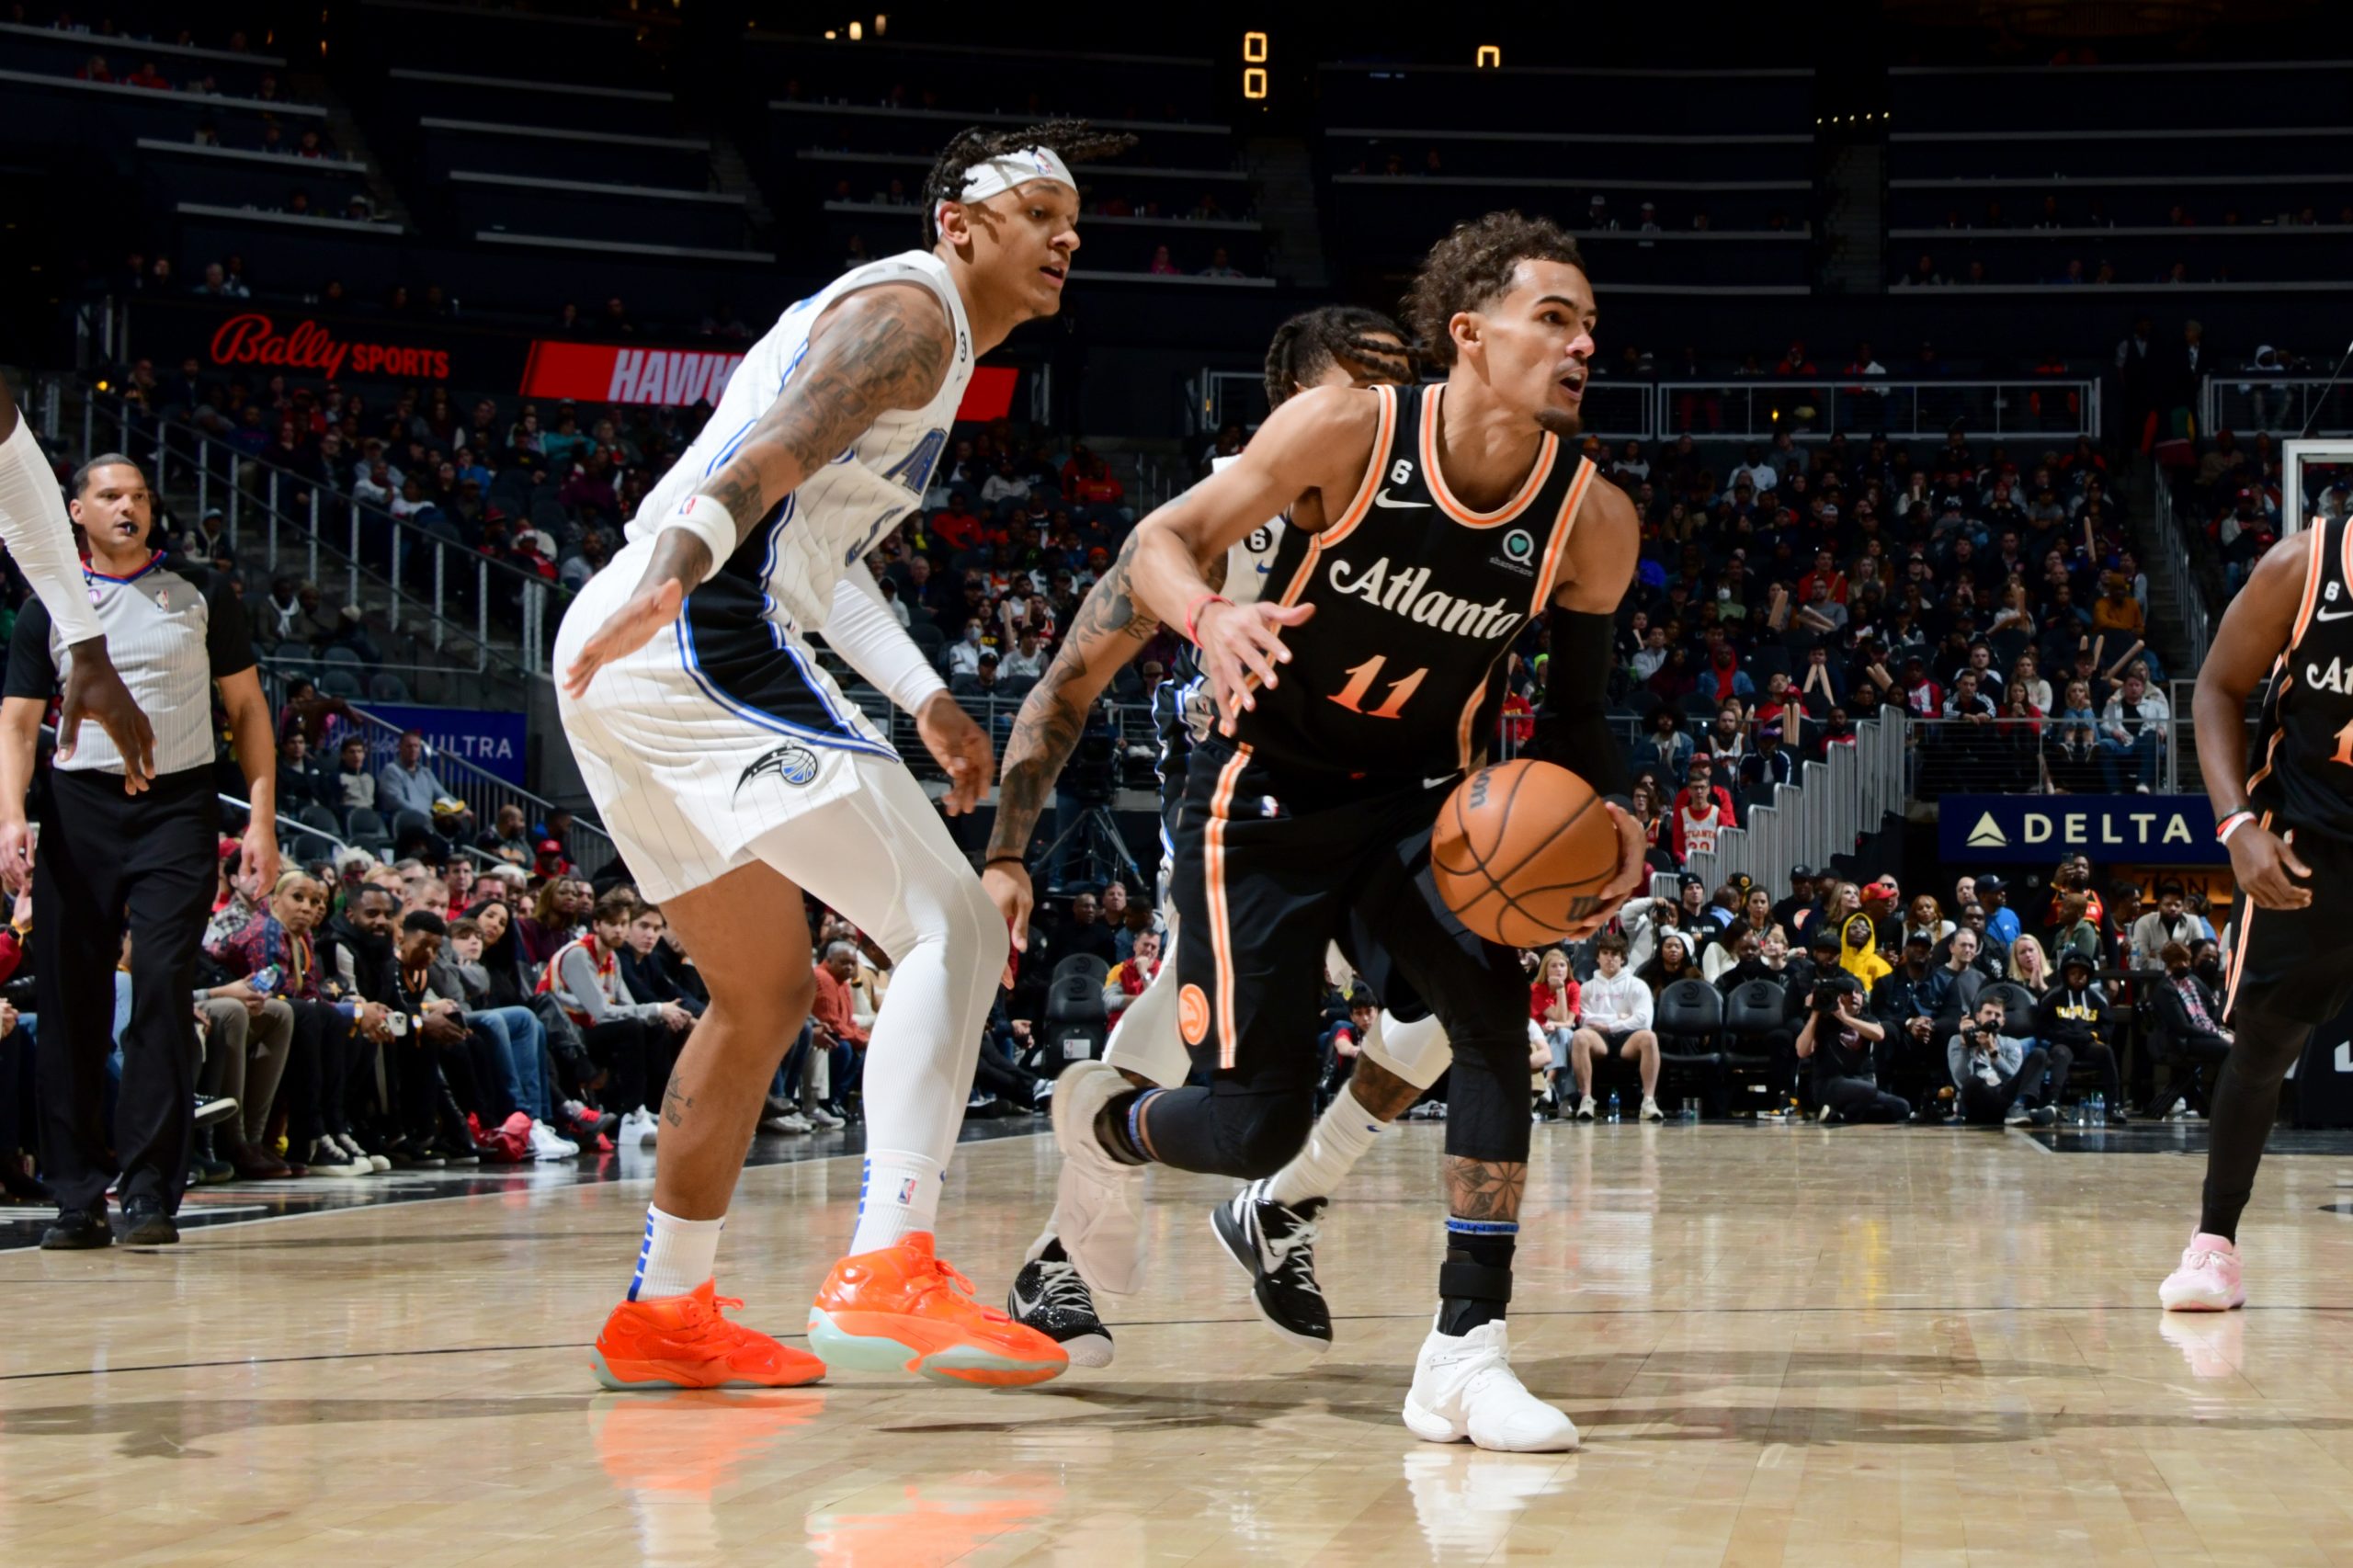 Sources: Trae Young Could Be Next NBA Superstar to Request Trade